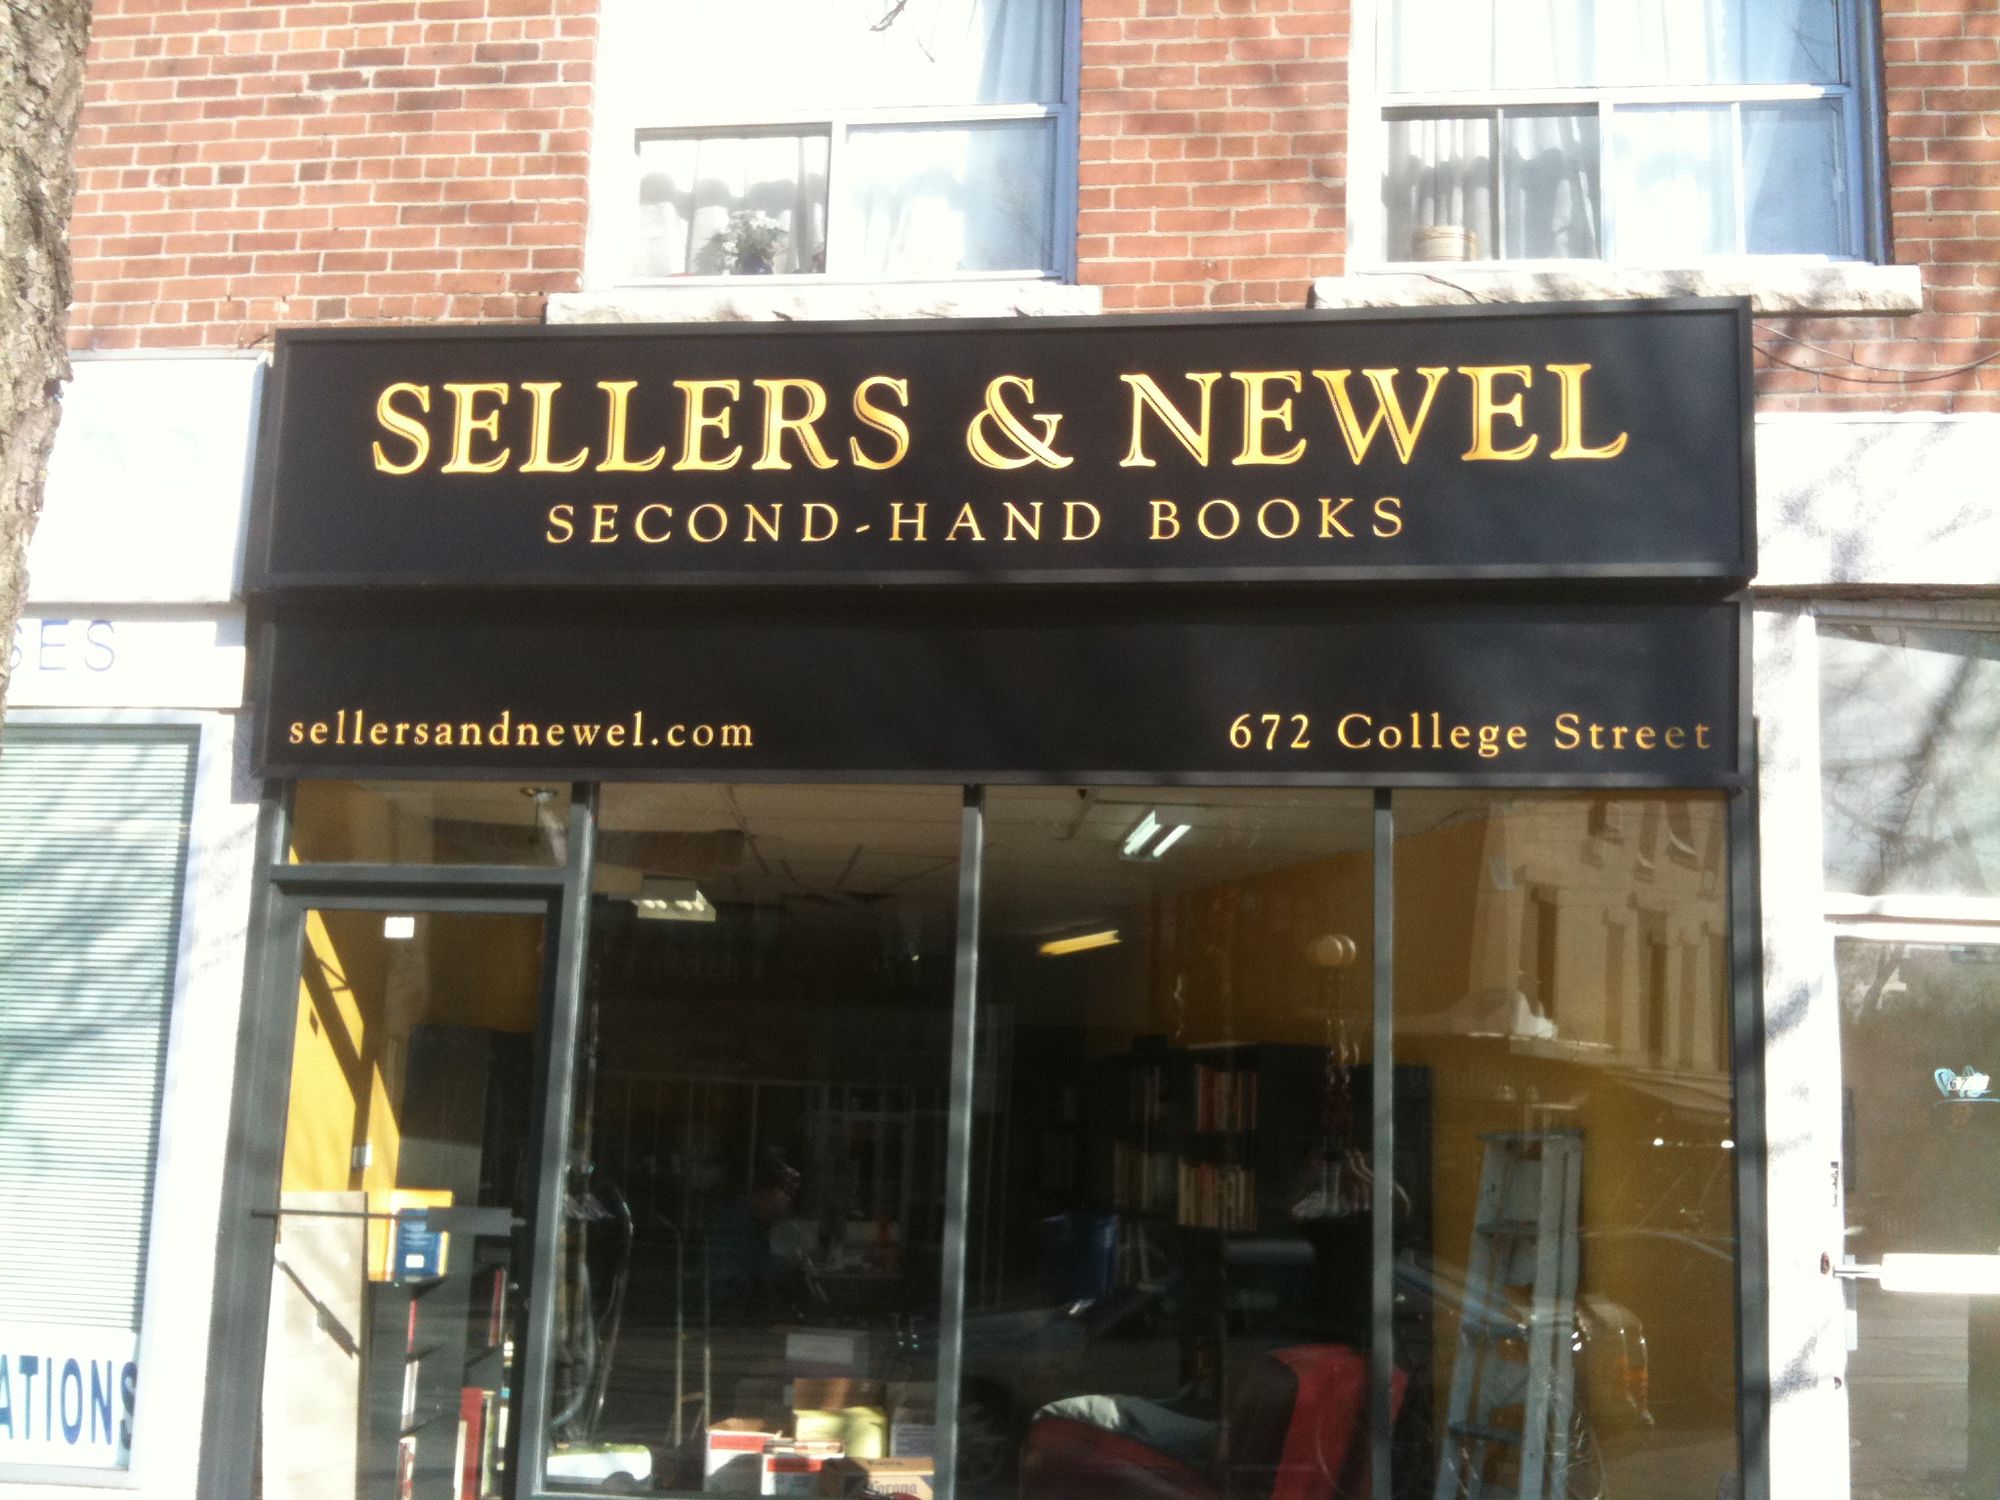 Great Books & Live Music - Sellers & Newel Second-Hand Books